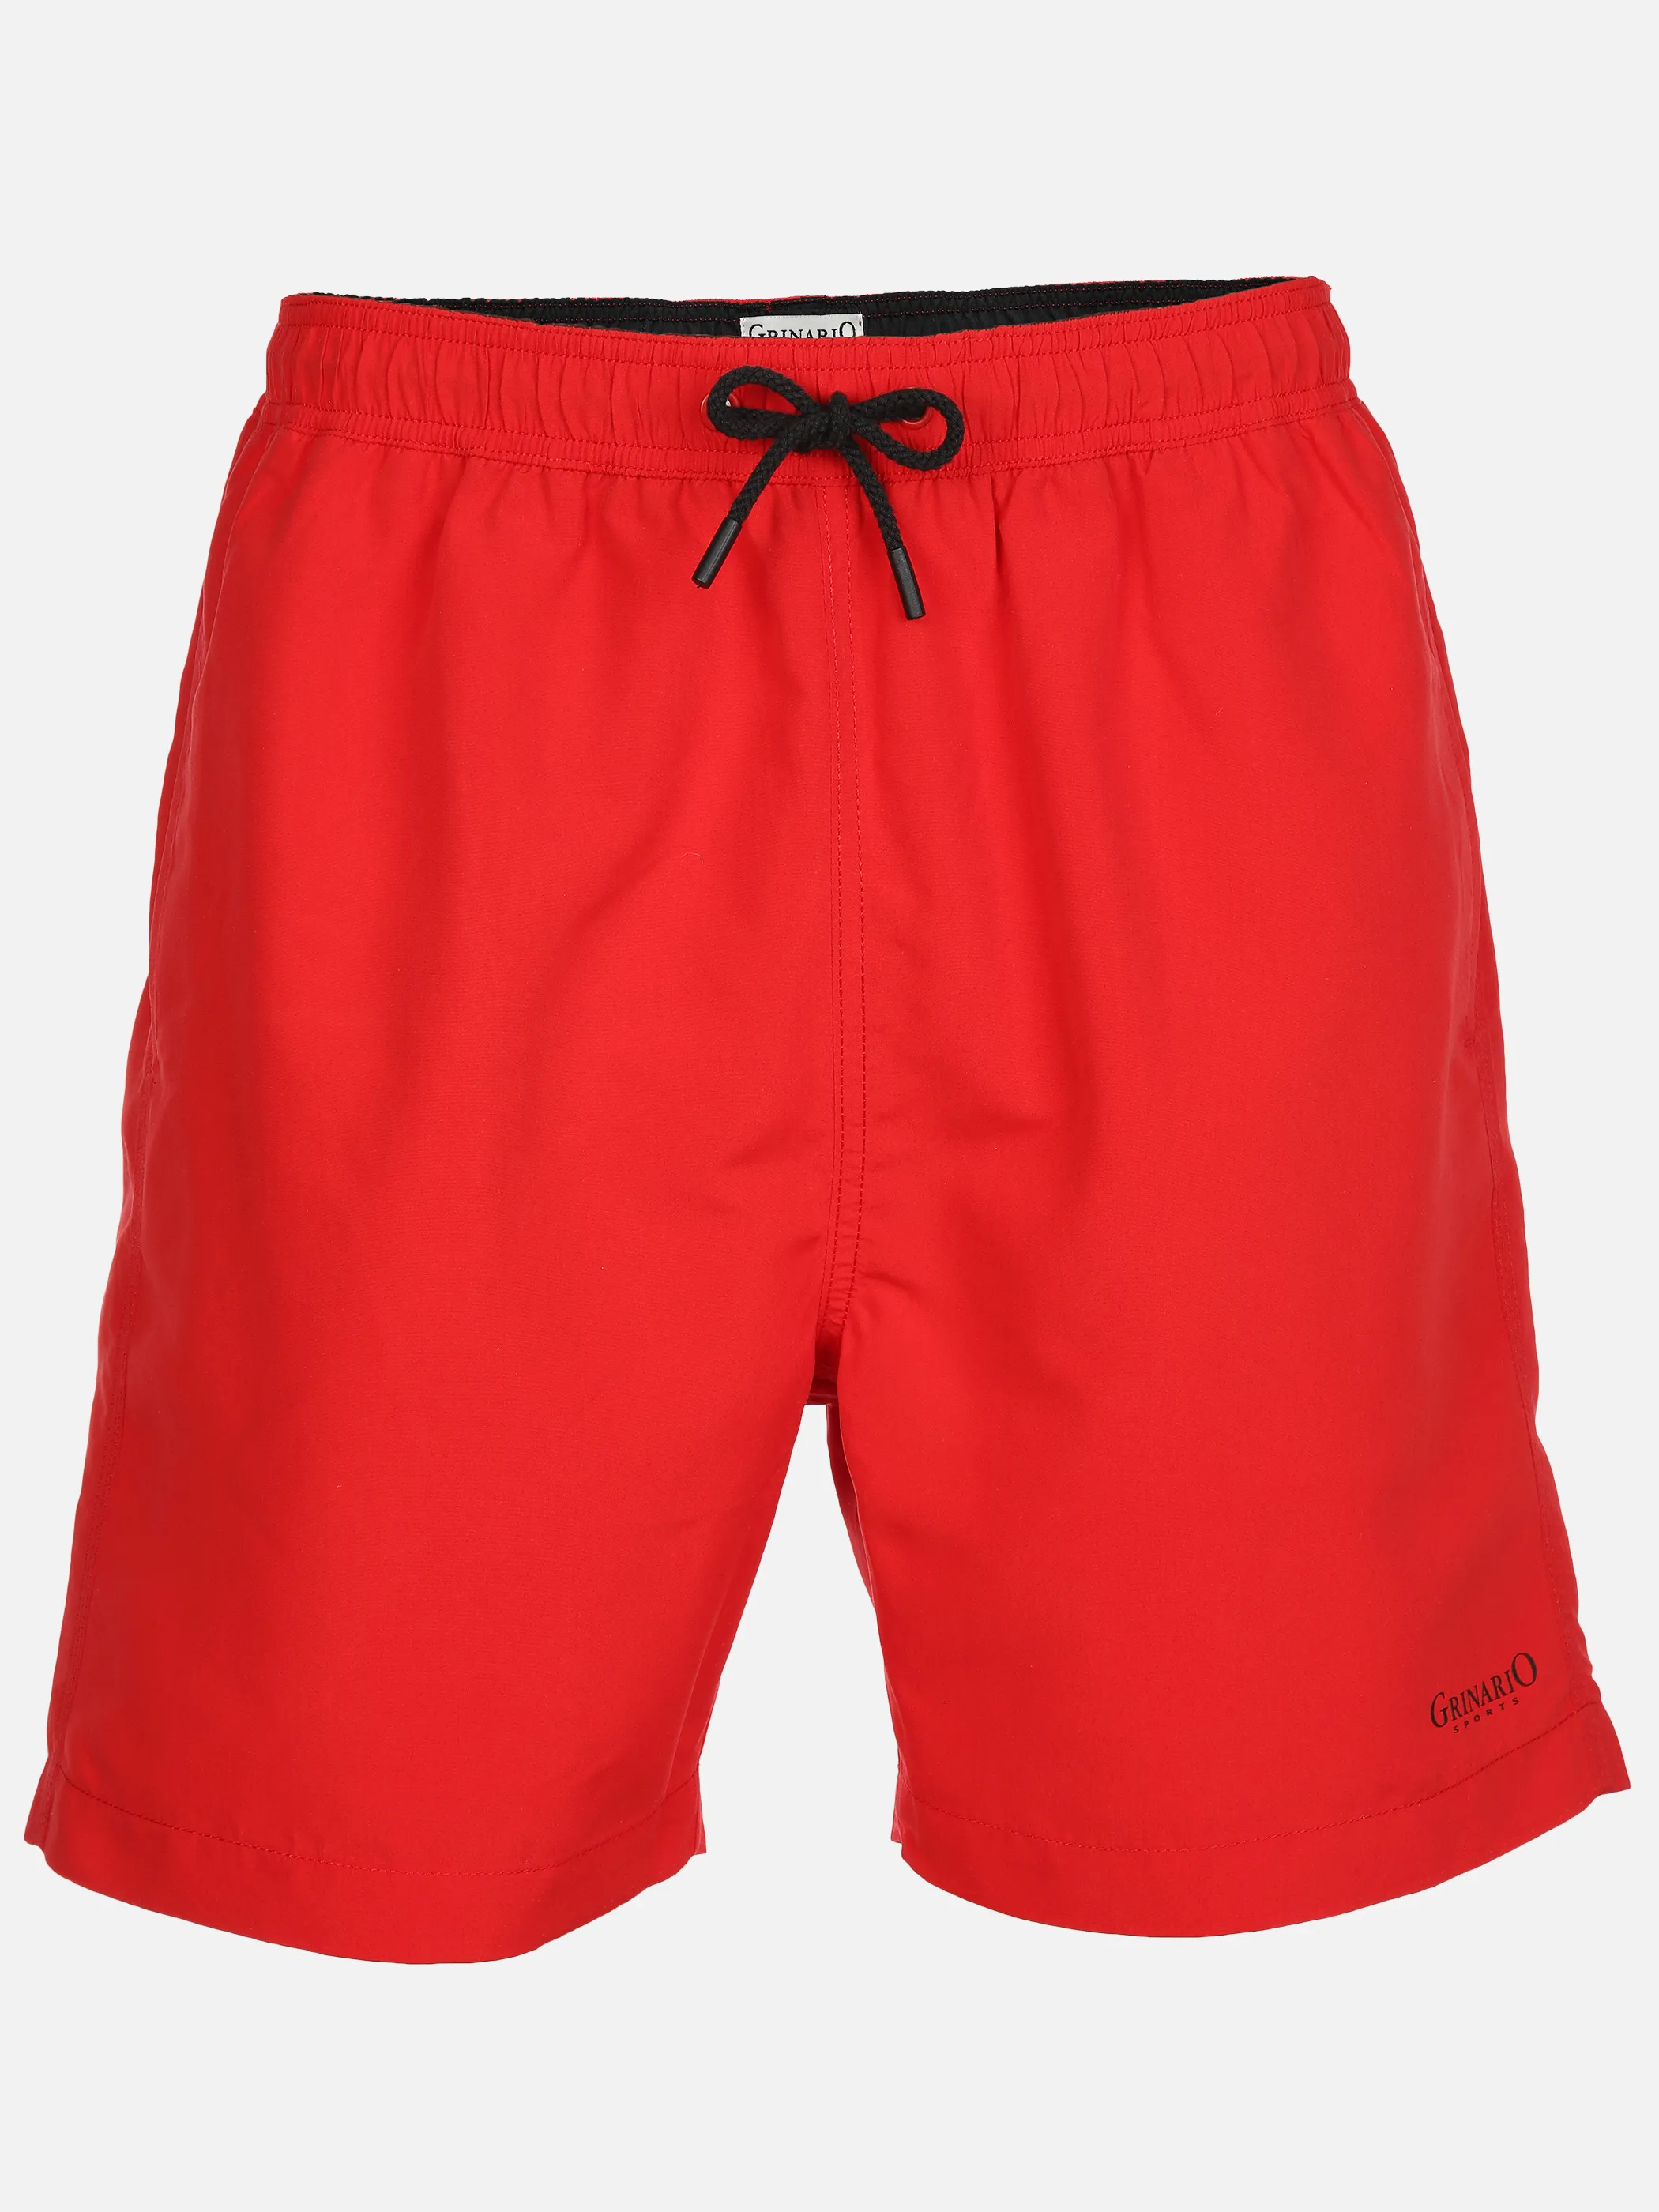 Grinario Sports He- Badehose uni, mit Kontrast Rot 890155 RED 1